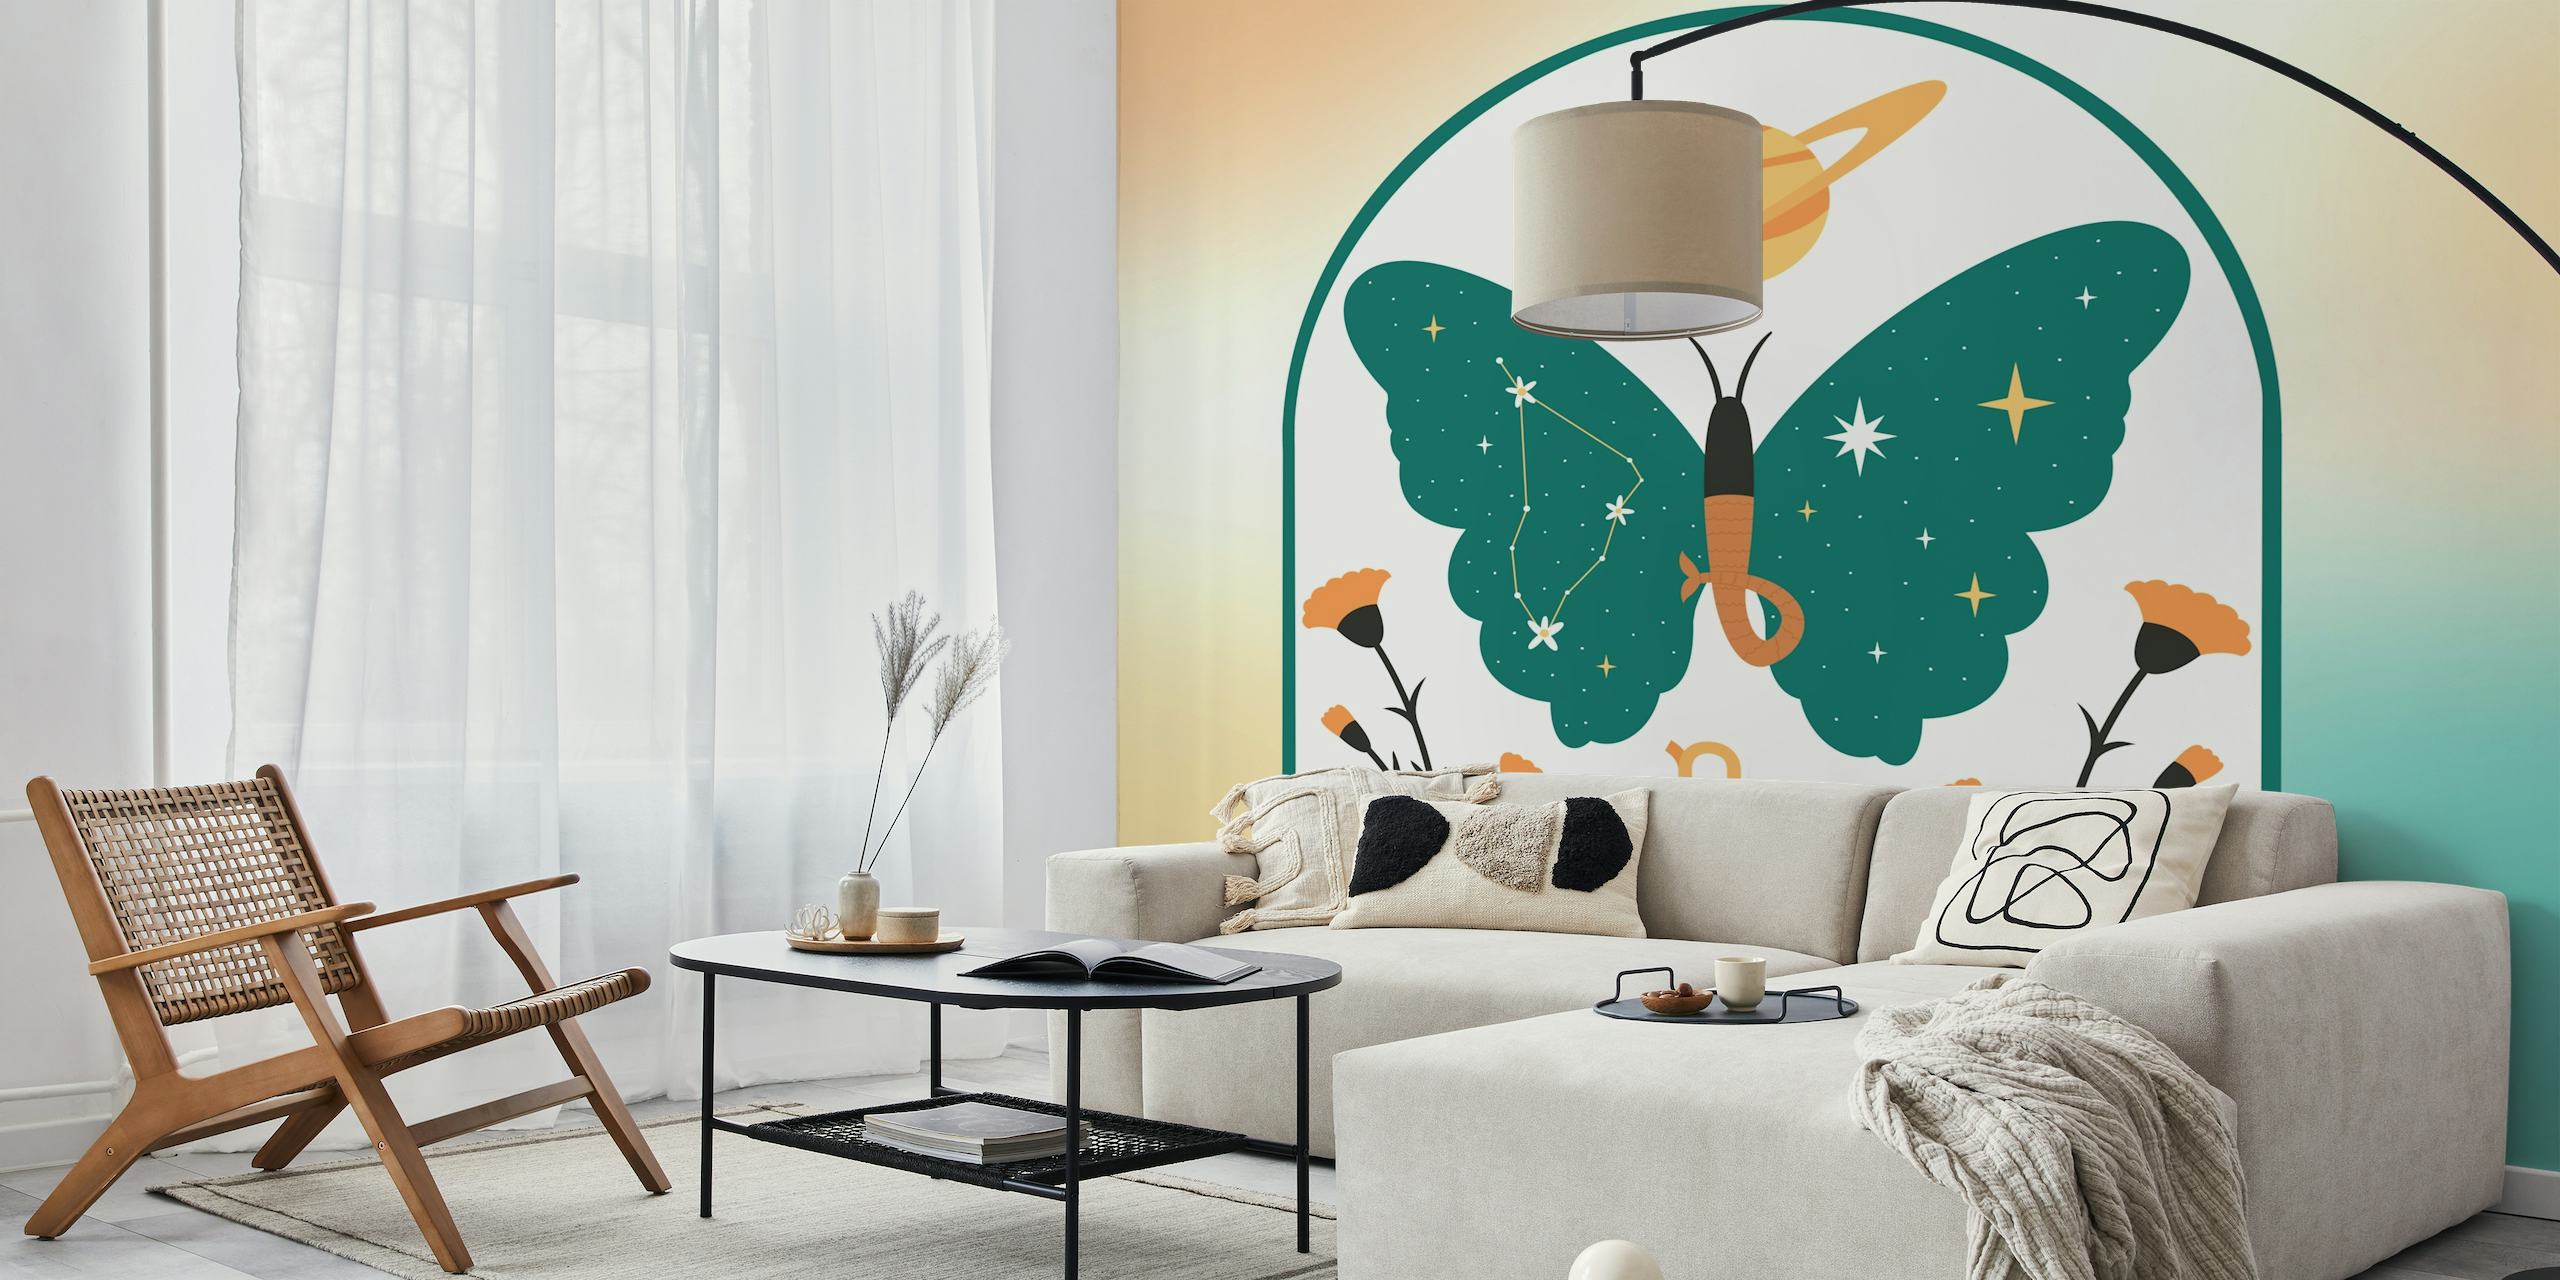 Capricorn zodiac sign as a butterfly wall mural with celestial and floral motifs